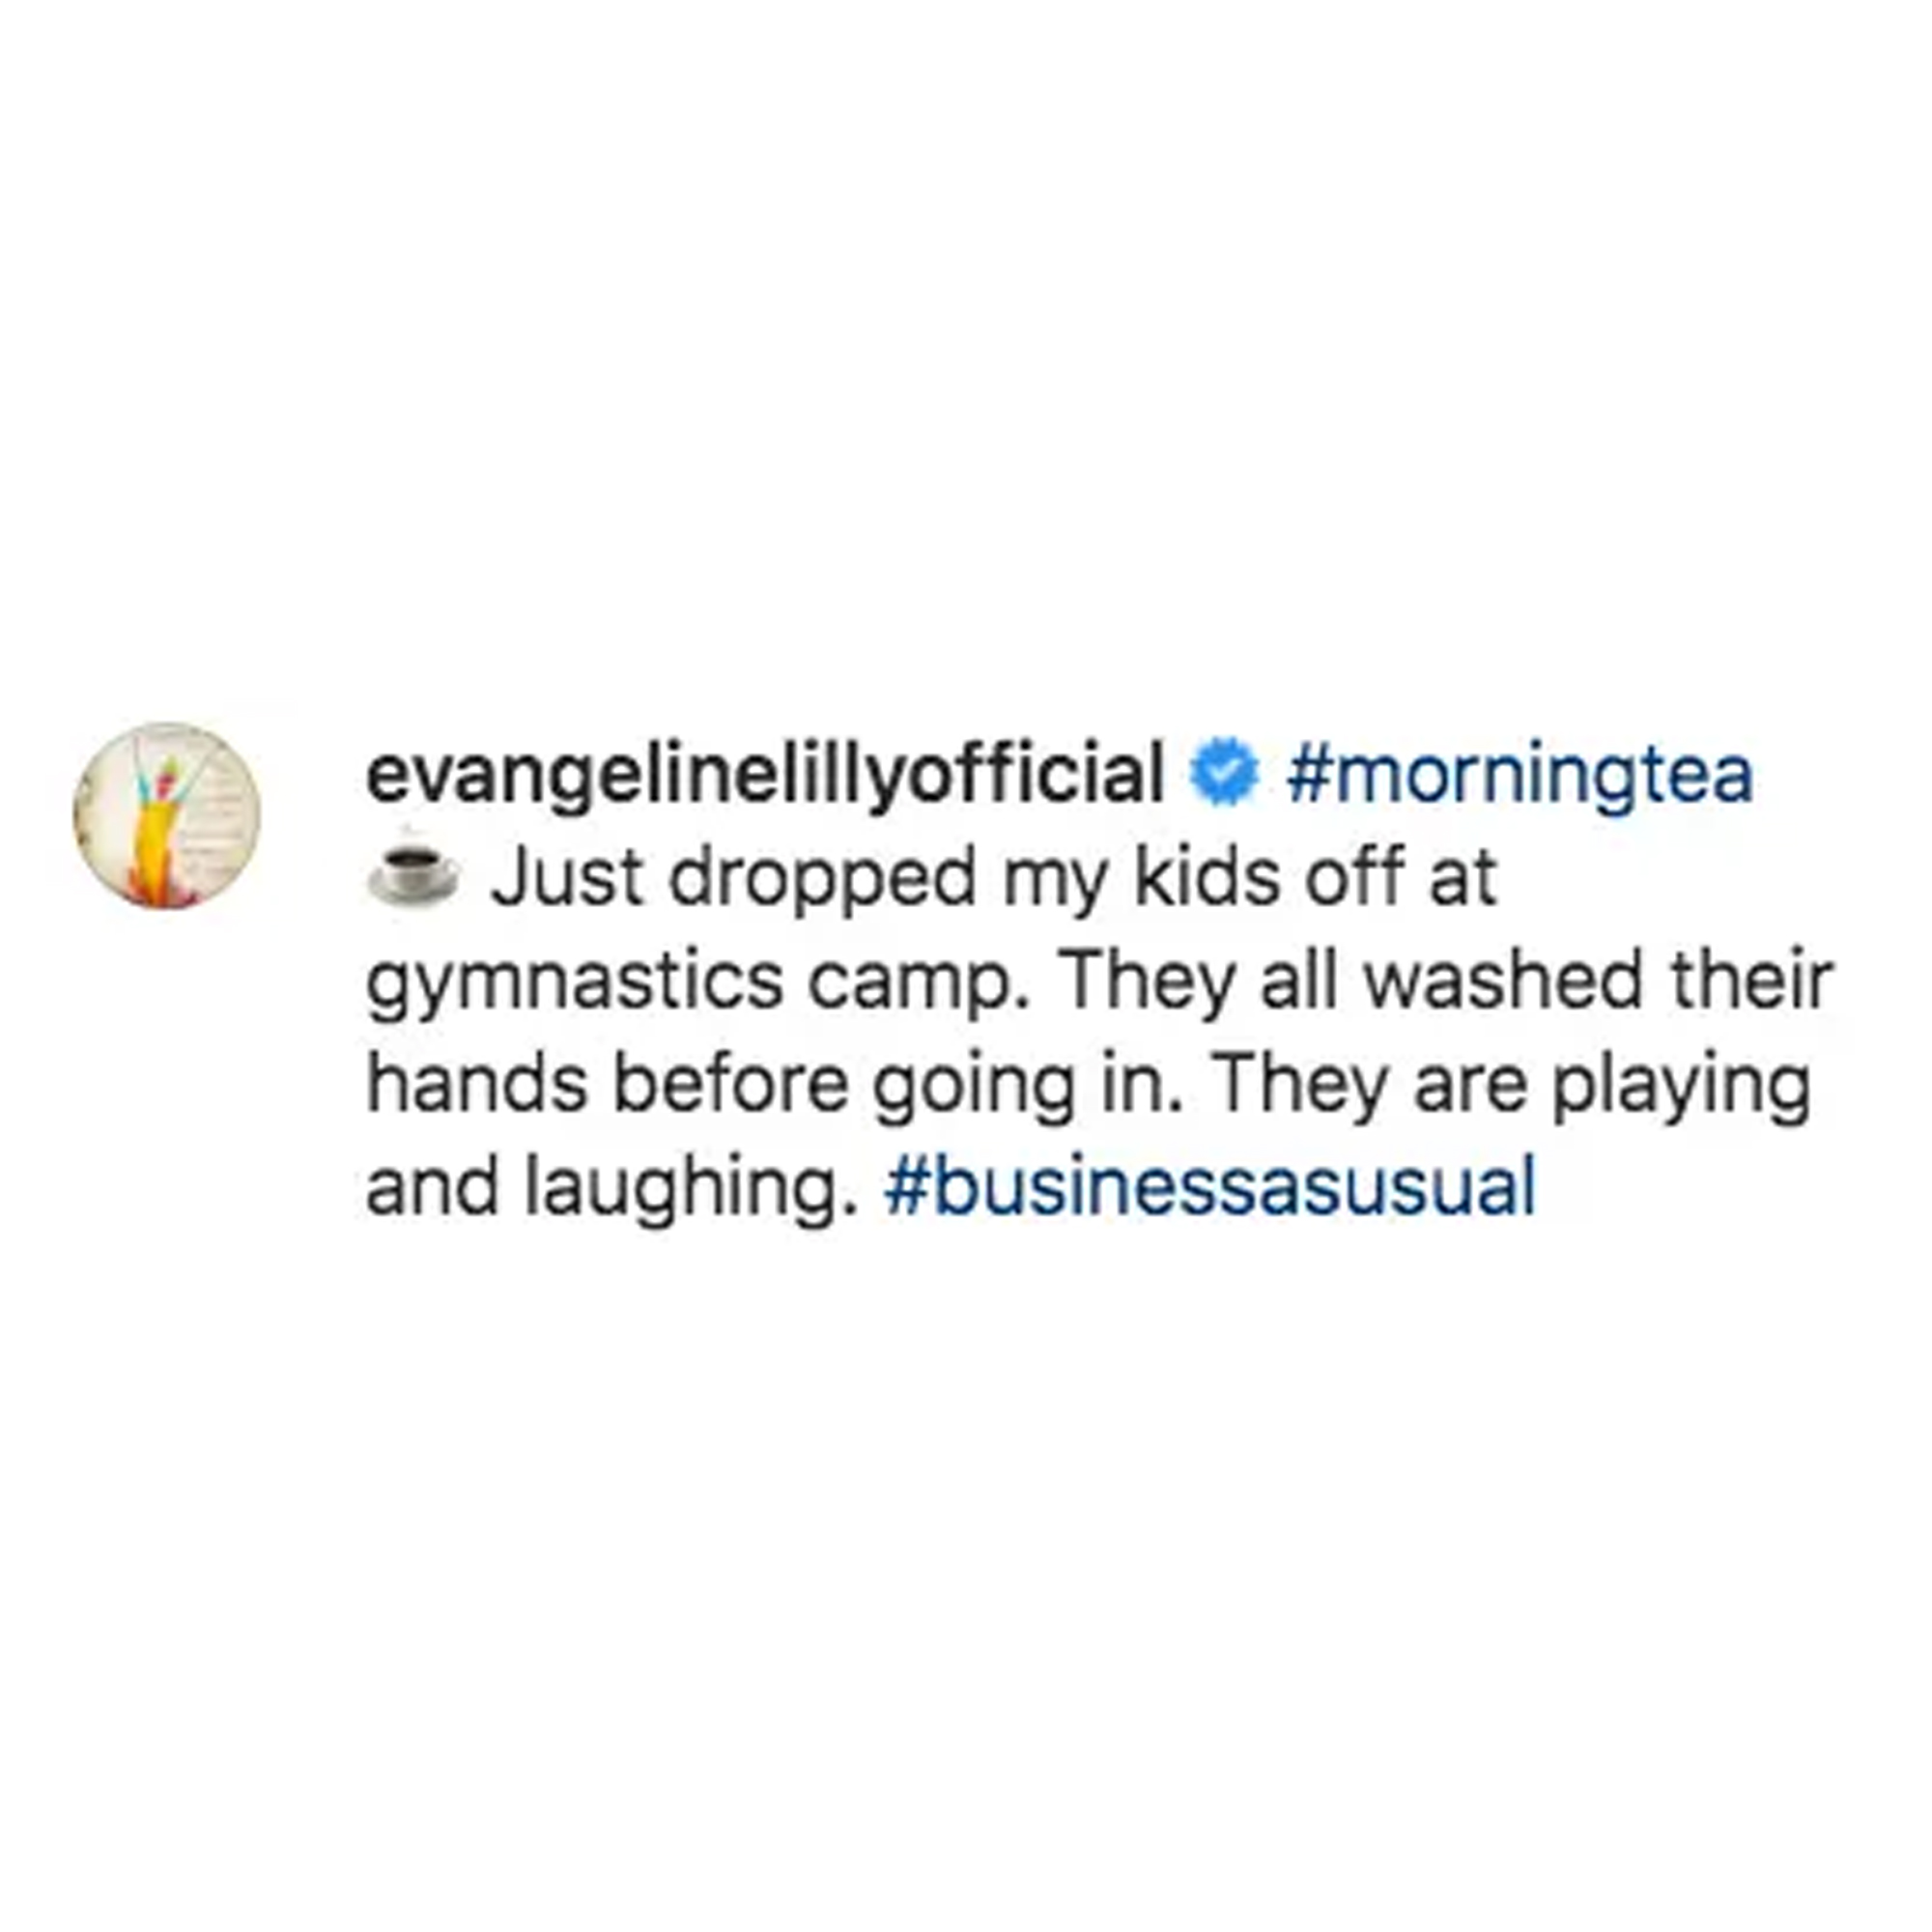 Cringe Celeb Pandemic Content - evangelinelillyofficial Just dropped my kids off at gymnastics camp. They all washed their hands before going in. They are playing and laughing.